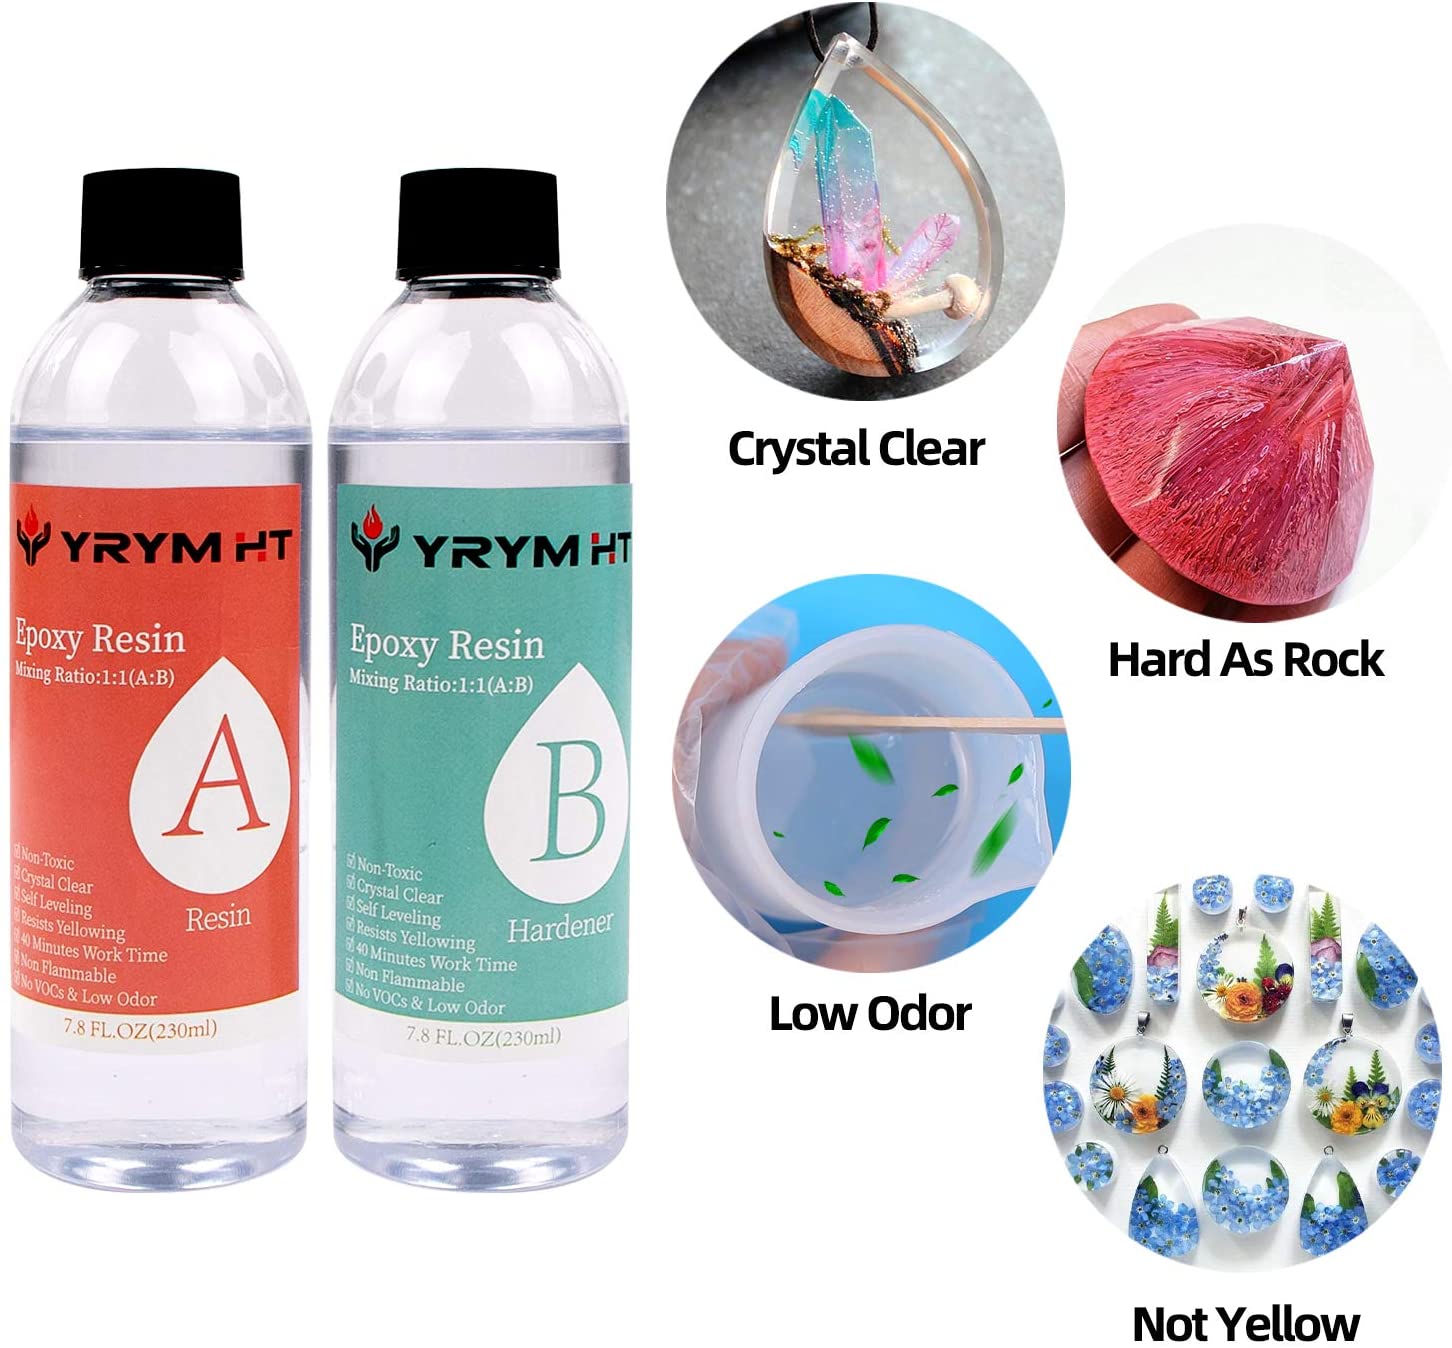 YRYM Epoxy Resin Kit for Beginners - 15.5 fl.oz. Crystal Clear Casting and Coating Epoxy Resin for Jewelry Making, Art, Crafts, Tumblers, River Tables, UV